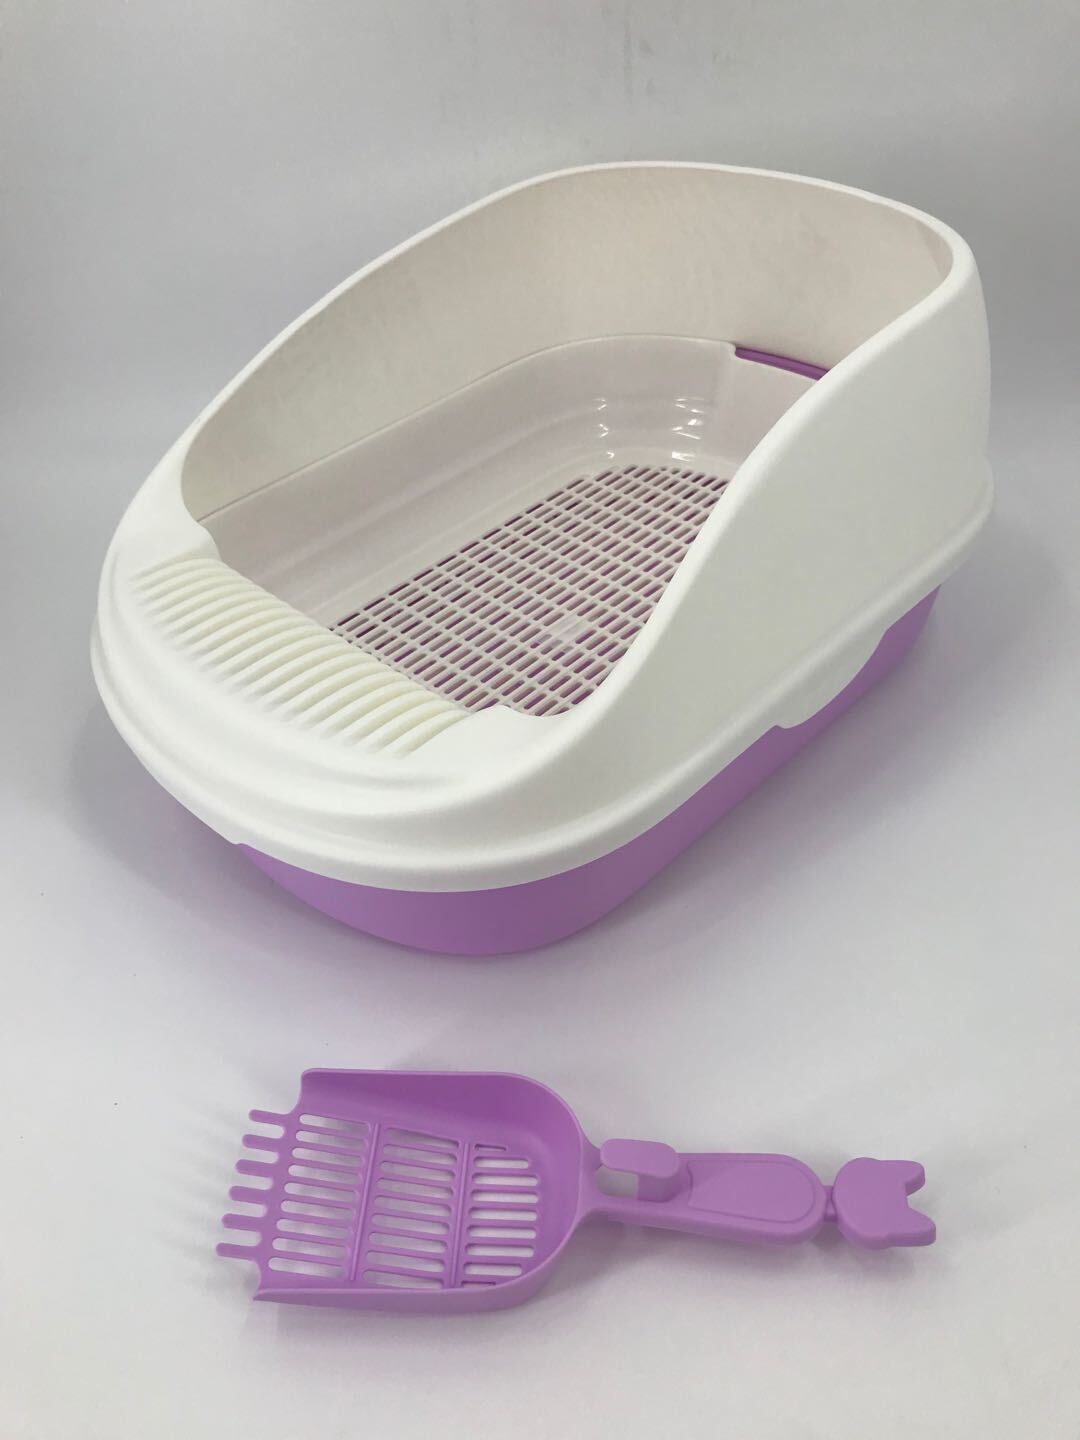 YES4PETS Large Portable Cat Toilet Litter Box Tray with Scoop and Grid Tray Purple